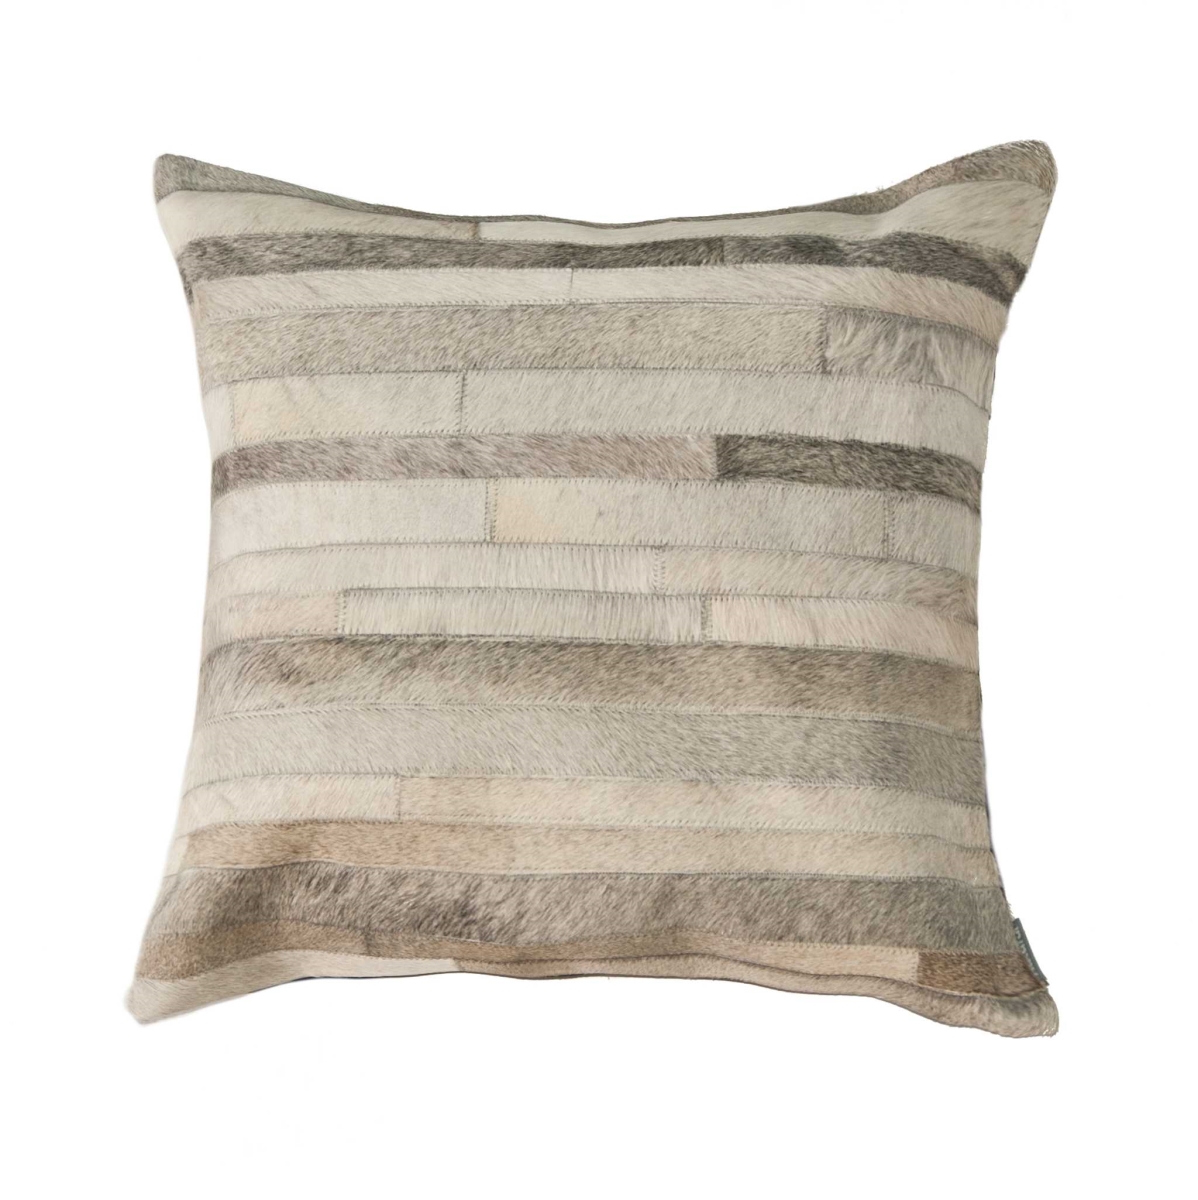 Home Roots Beddings 332307 Torino Classic Large Madrid Cowhide Pillow, Grey - 22 X 22 In.